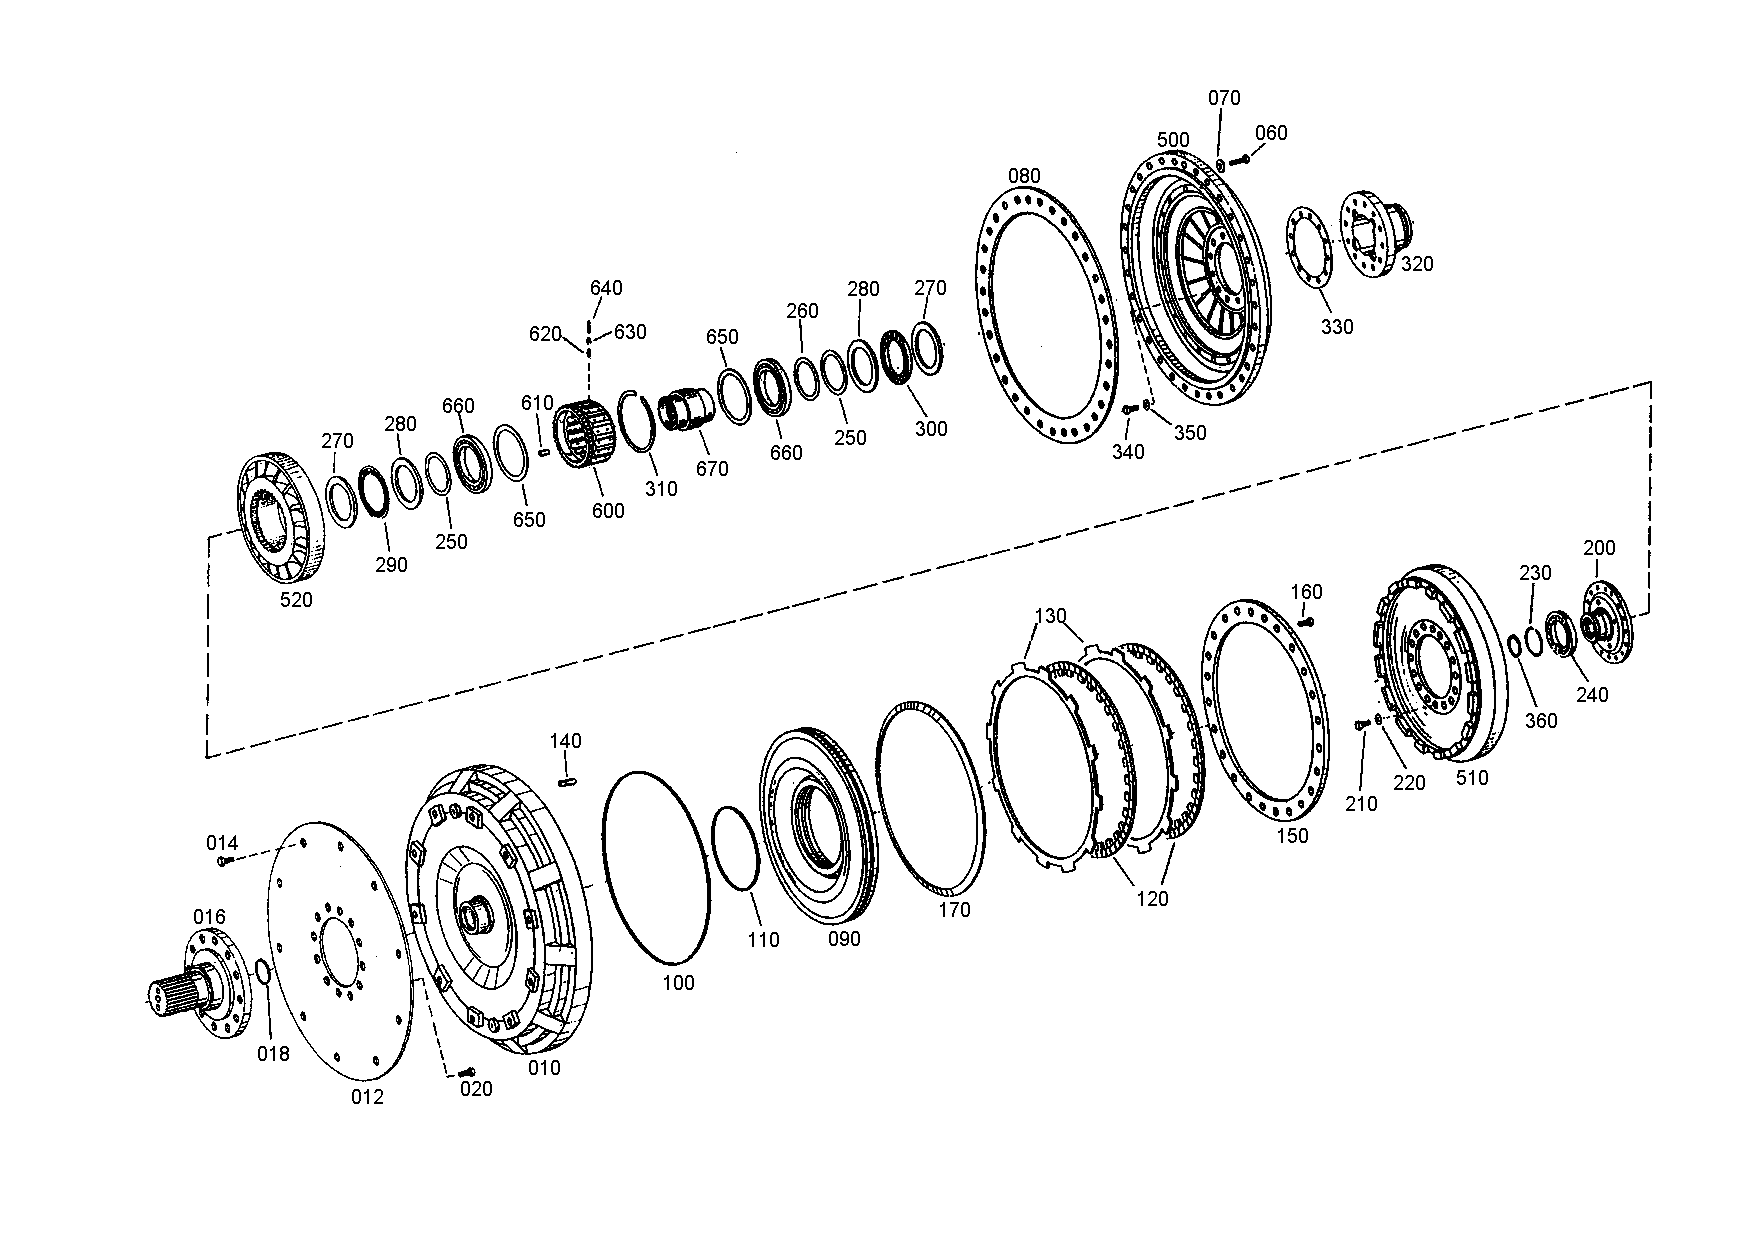 drawing for Manitowoc Crane Group Germany 03329243 - OUTPUT SHAFT (figure 2)